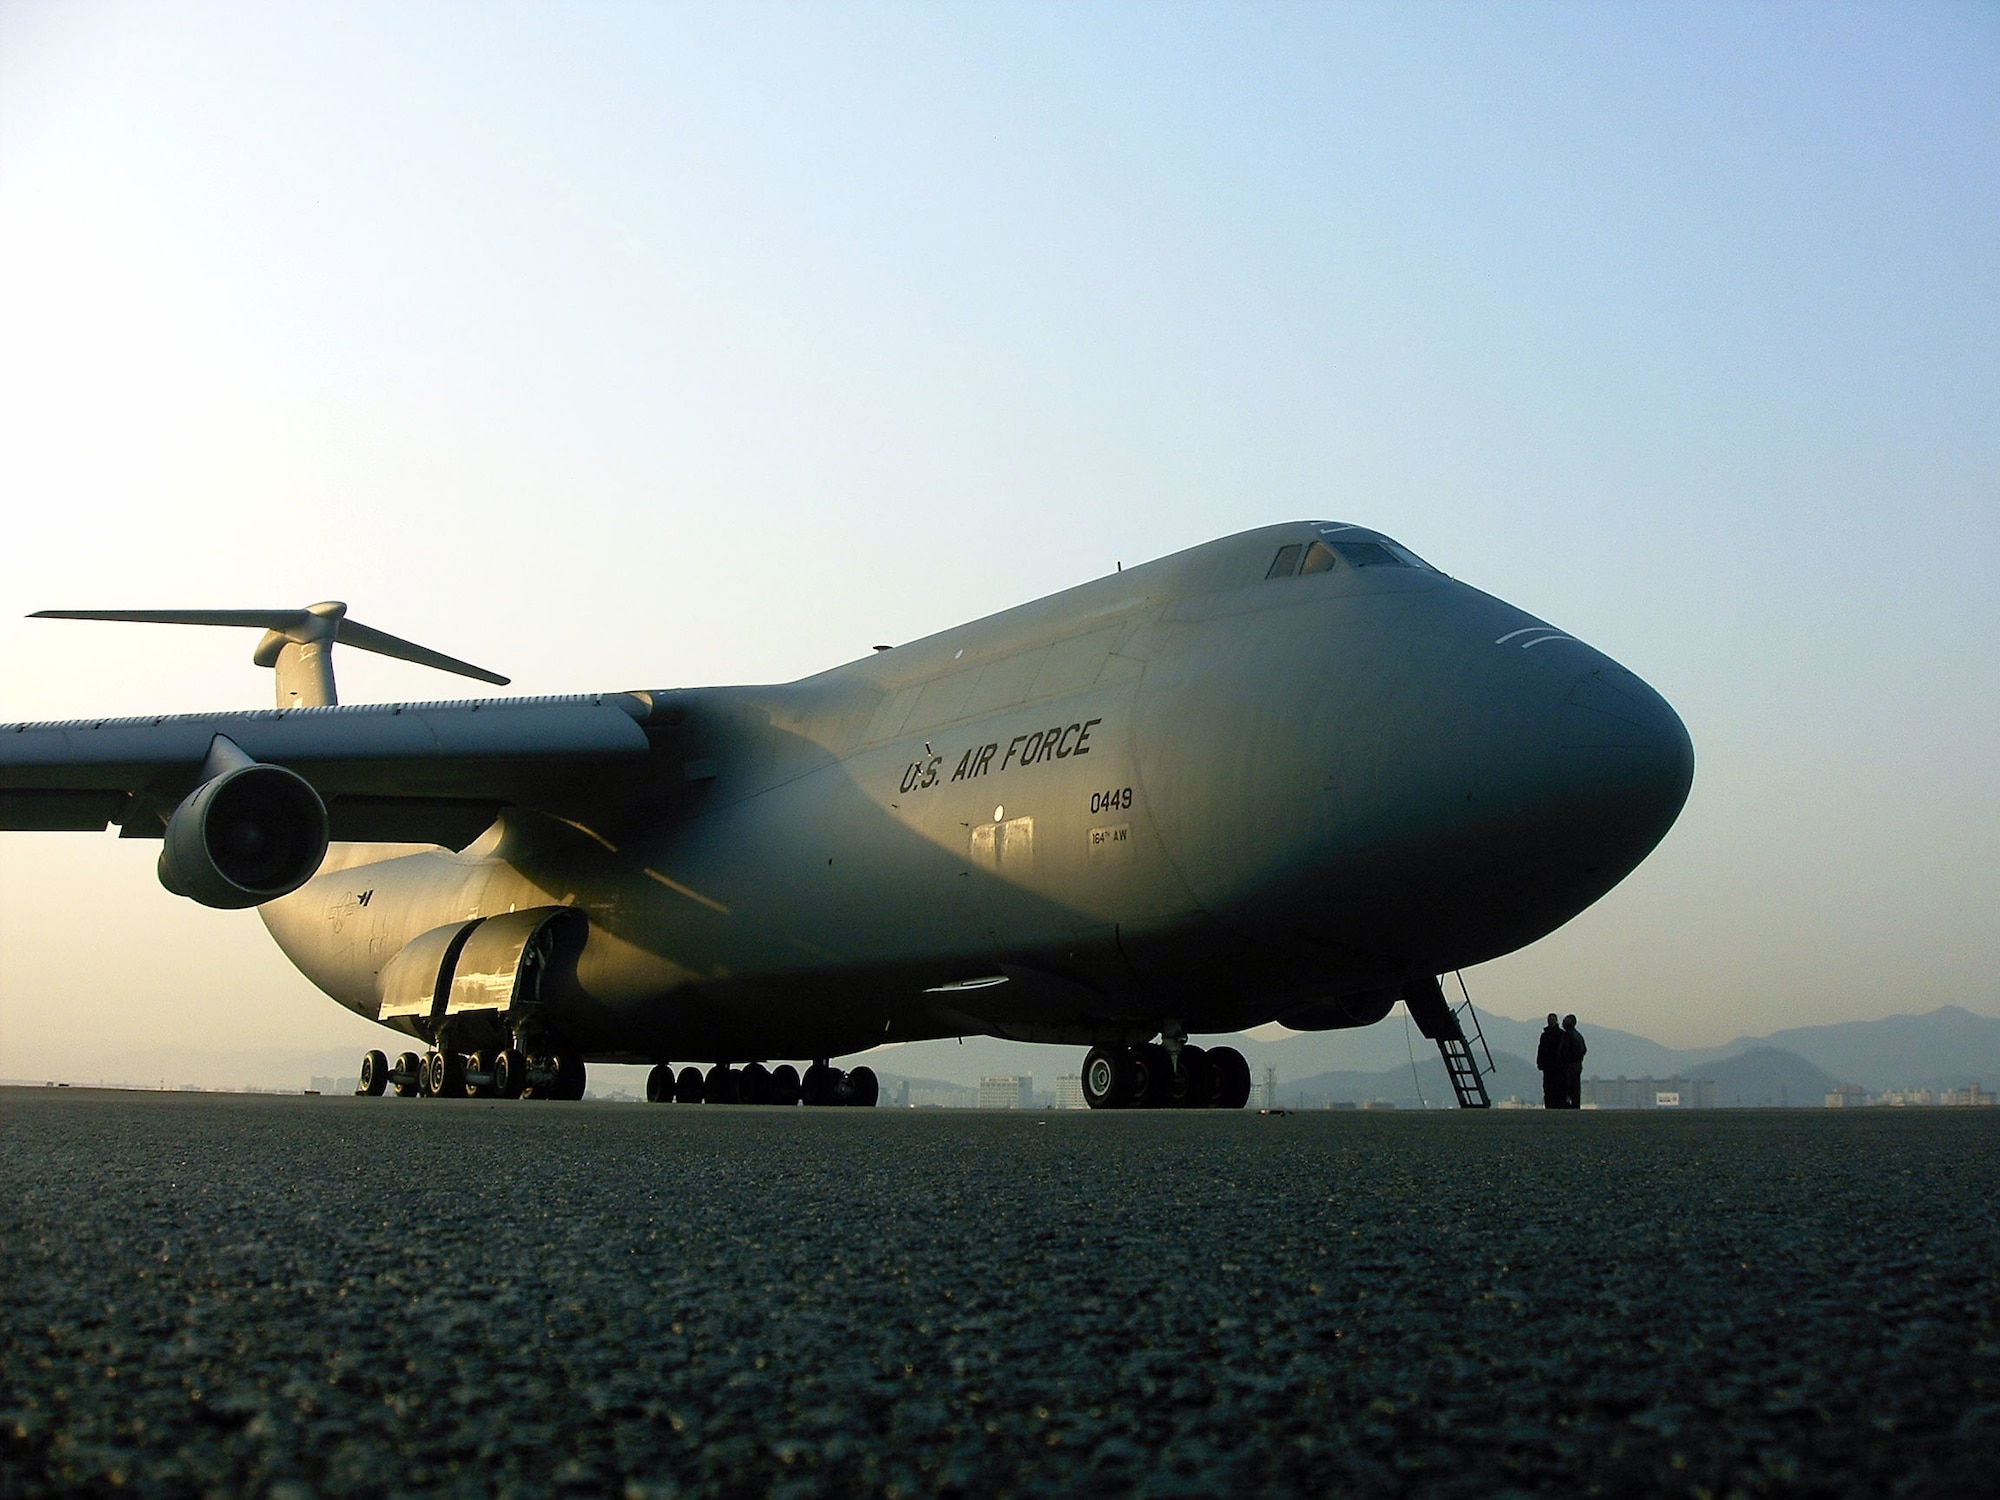 A Tennessee Air National Guard C-5 Galaxy sits on the flightline at Taegu Air Base, South Korea, on Saturday, March 25, 2006. The Galaxy has been carrying troops and cargo for more than 30 years. A C-5 crashed at Dover Air Force Base, Del., on April 3 -- only the sixth crash in the aircraft's history. (U.S. Army photo/Pfc. Nicholas A. Hernandez)